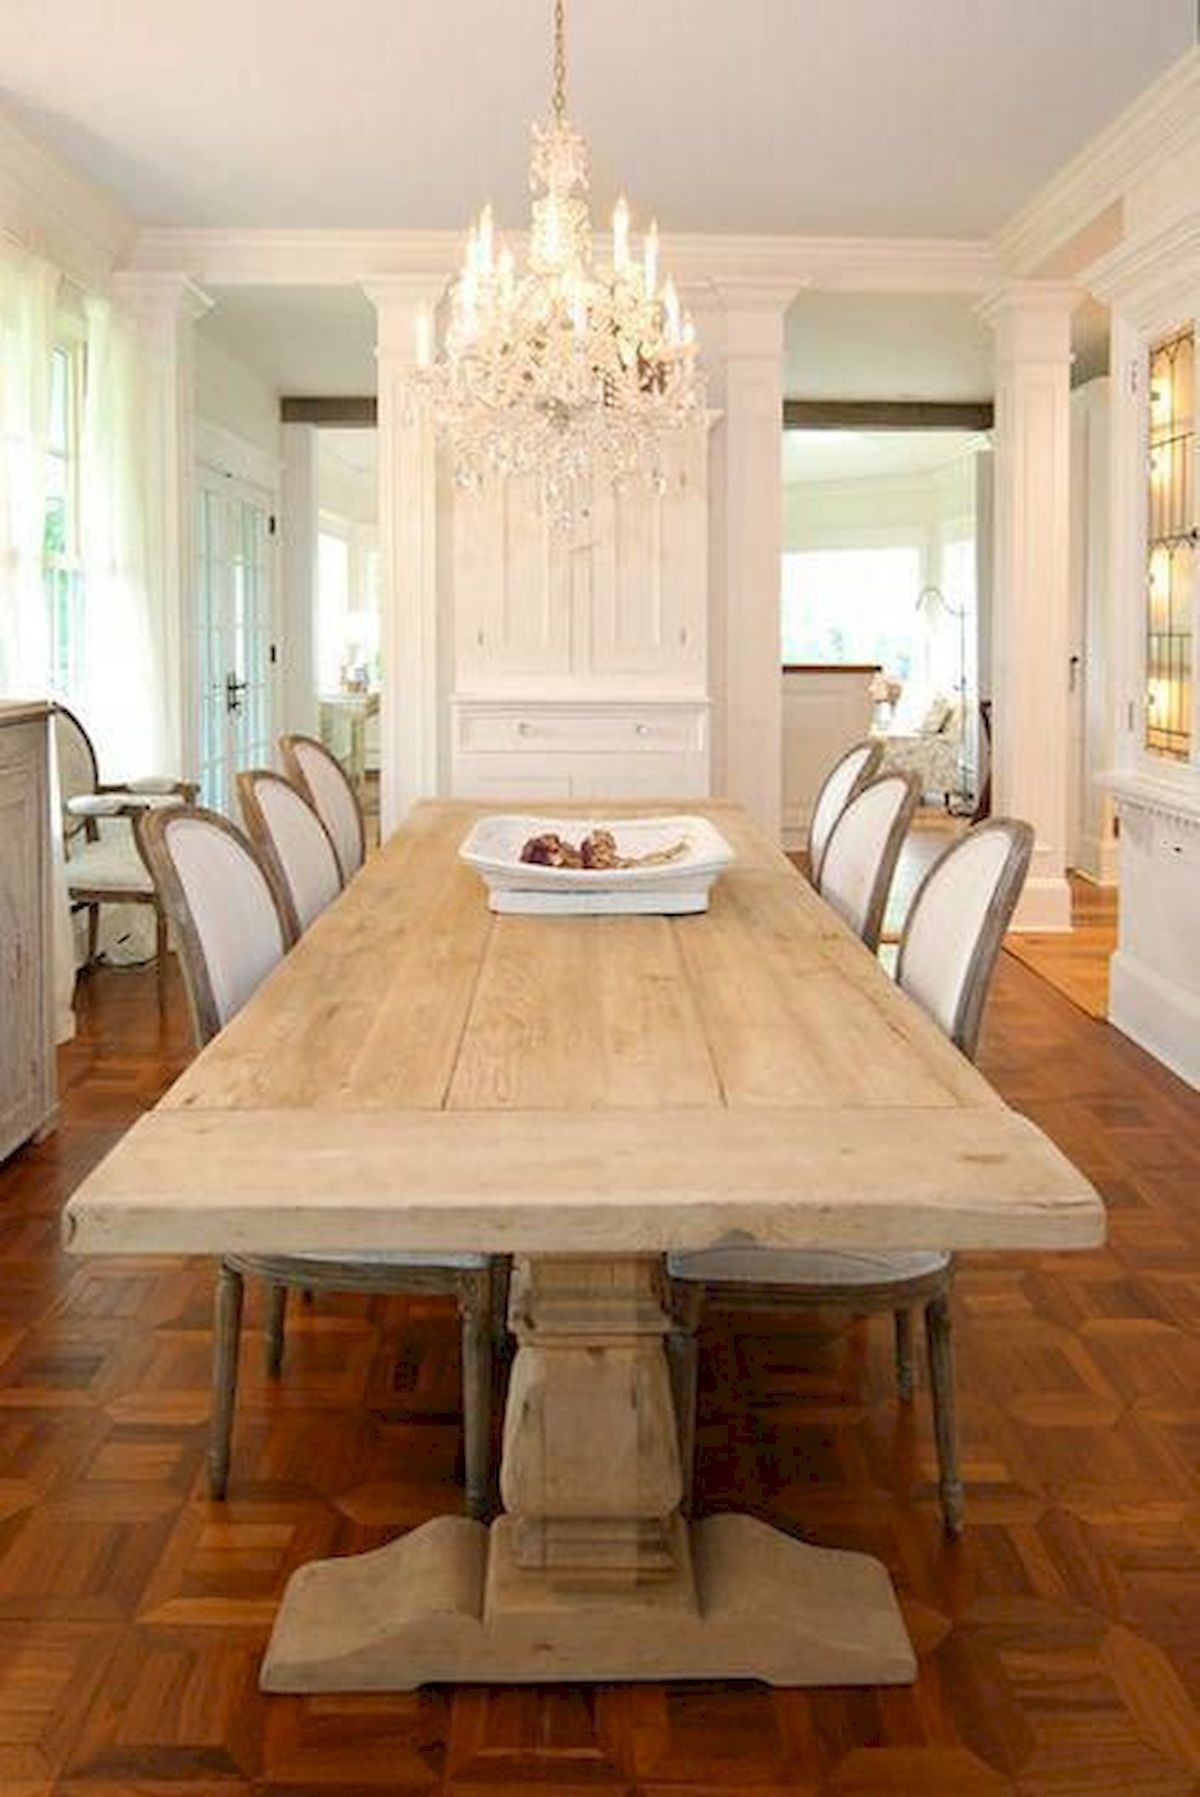 Dining tables that seat 10